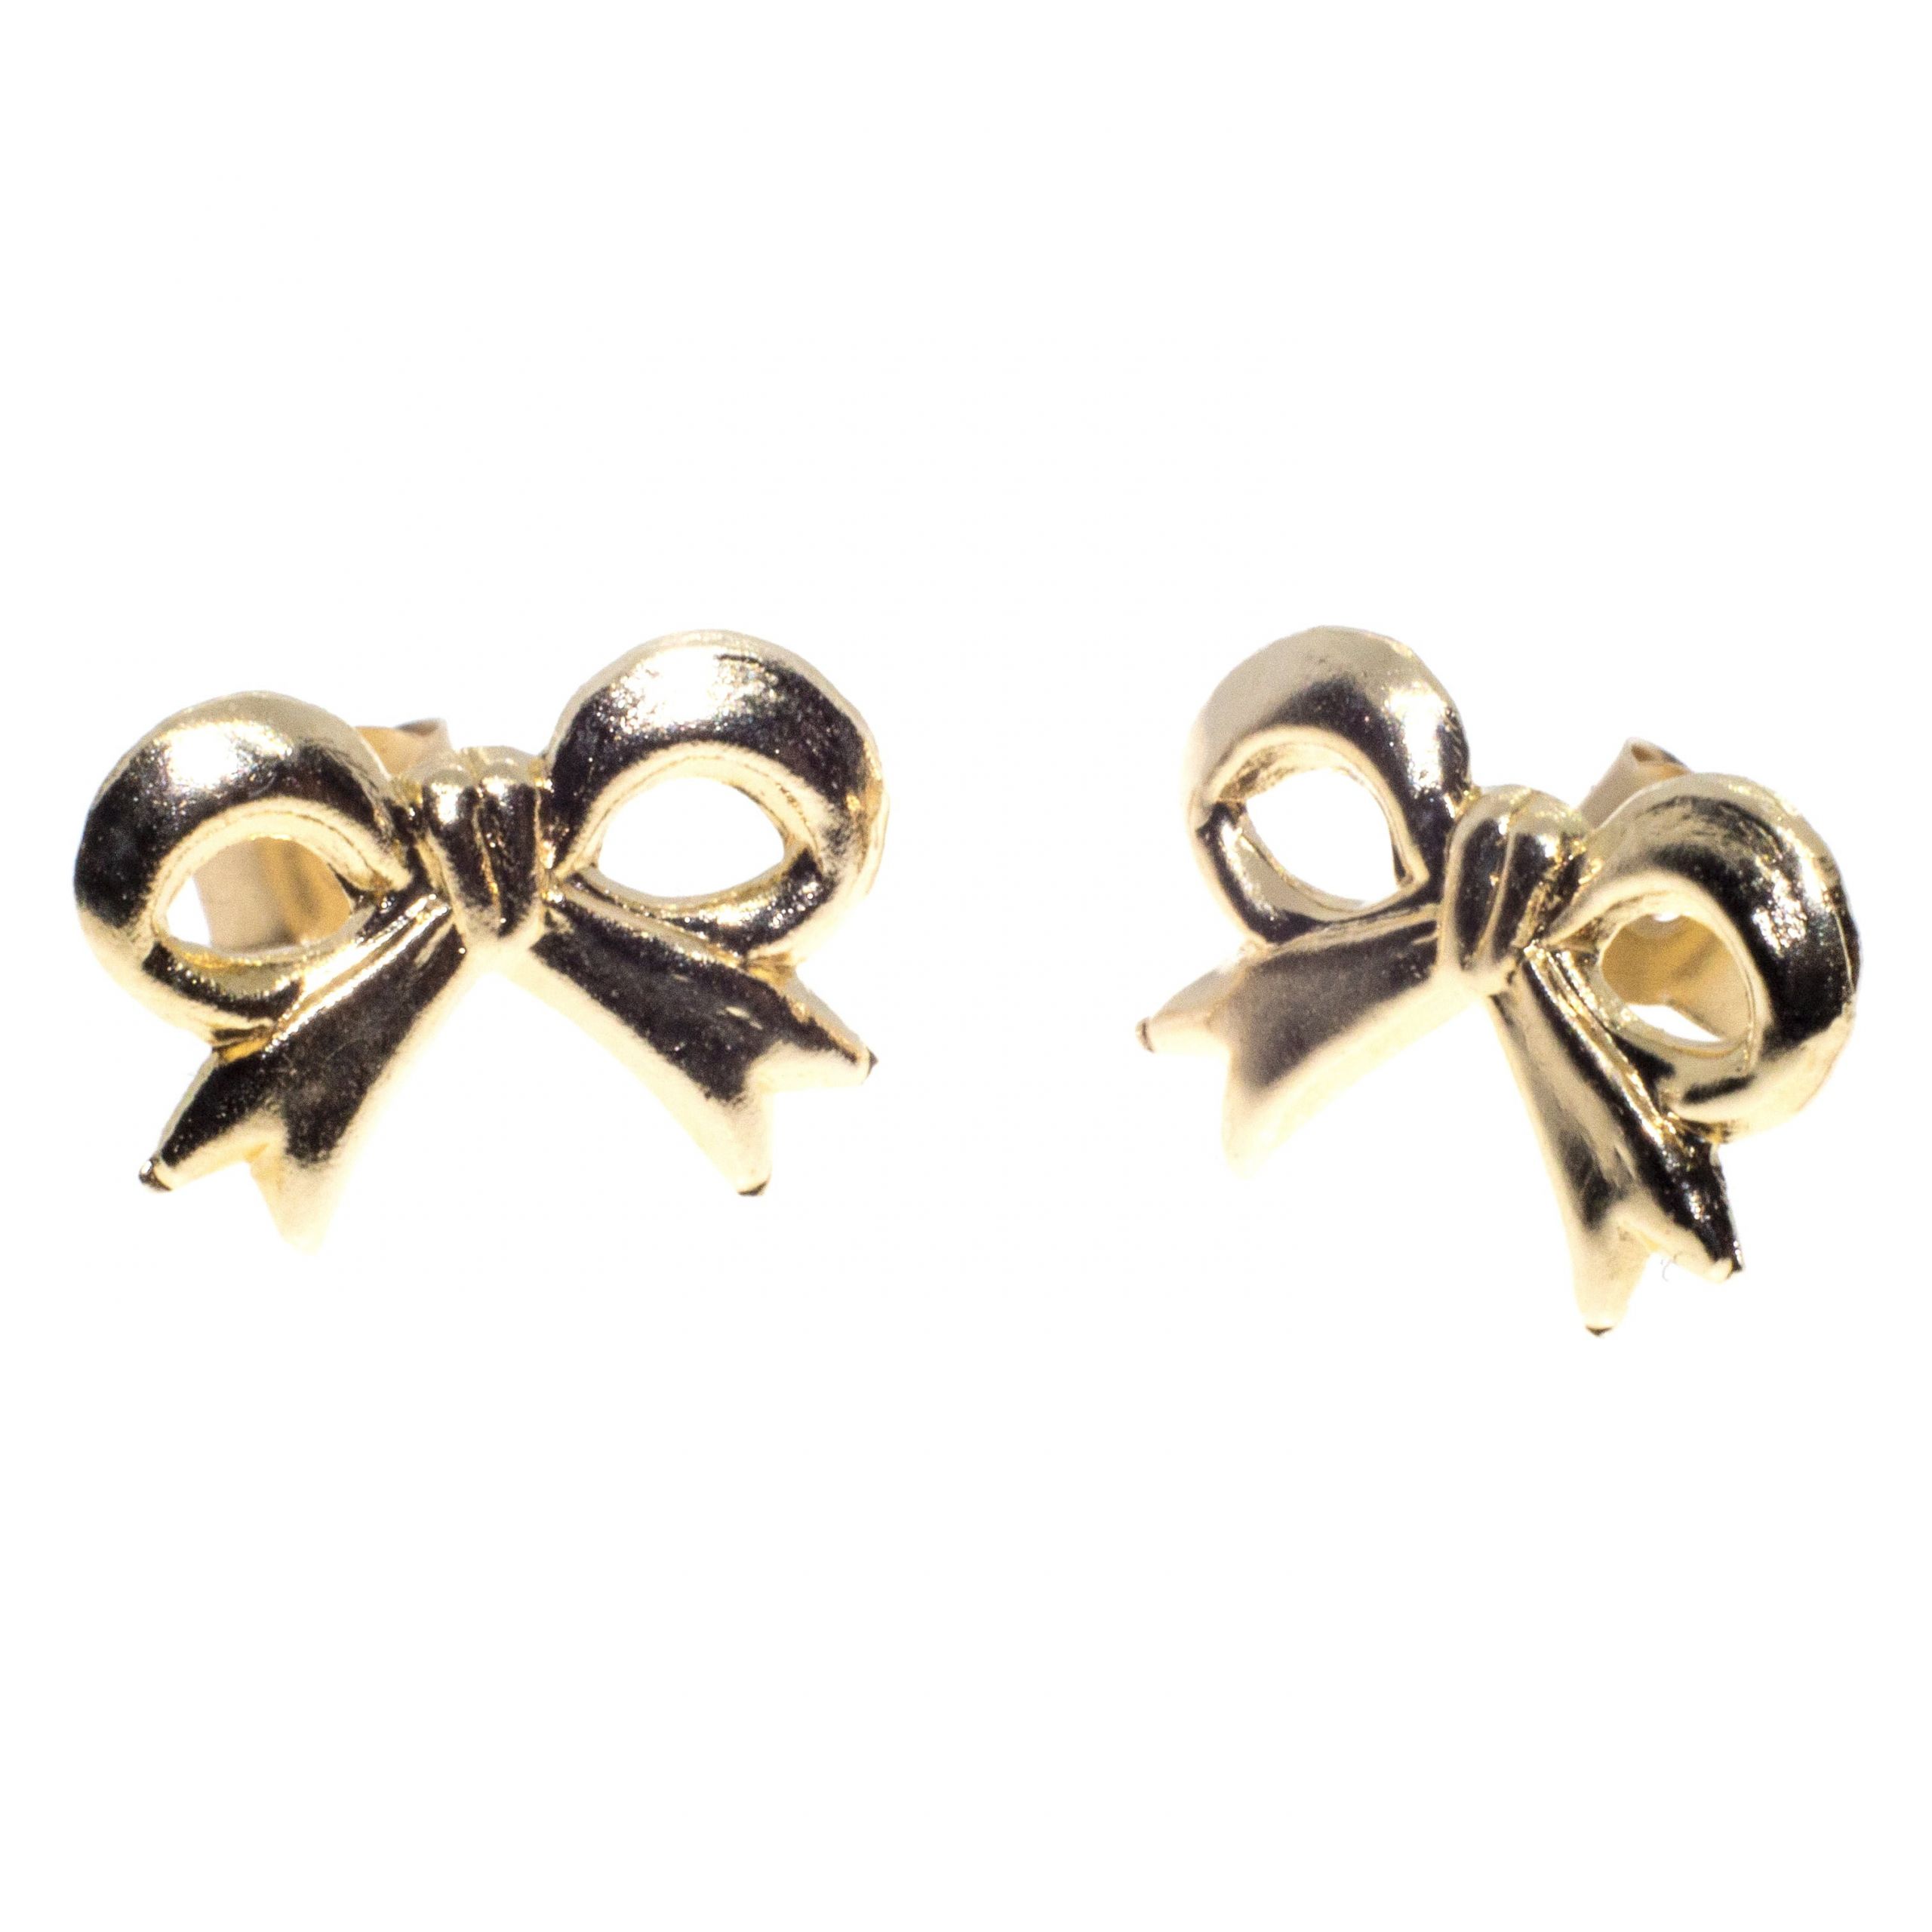 Gold Bow Earrings
 Ribbon bow stud earrings in 9ct yellow gold